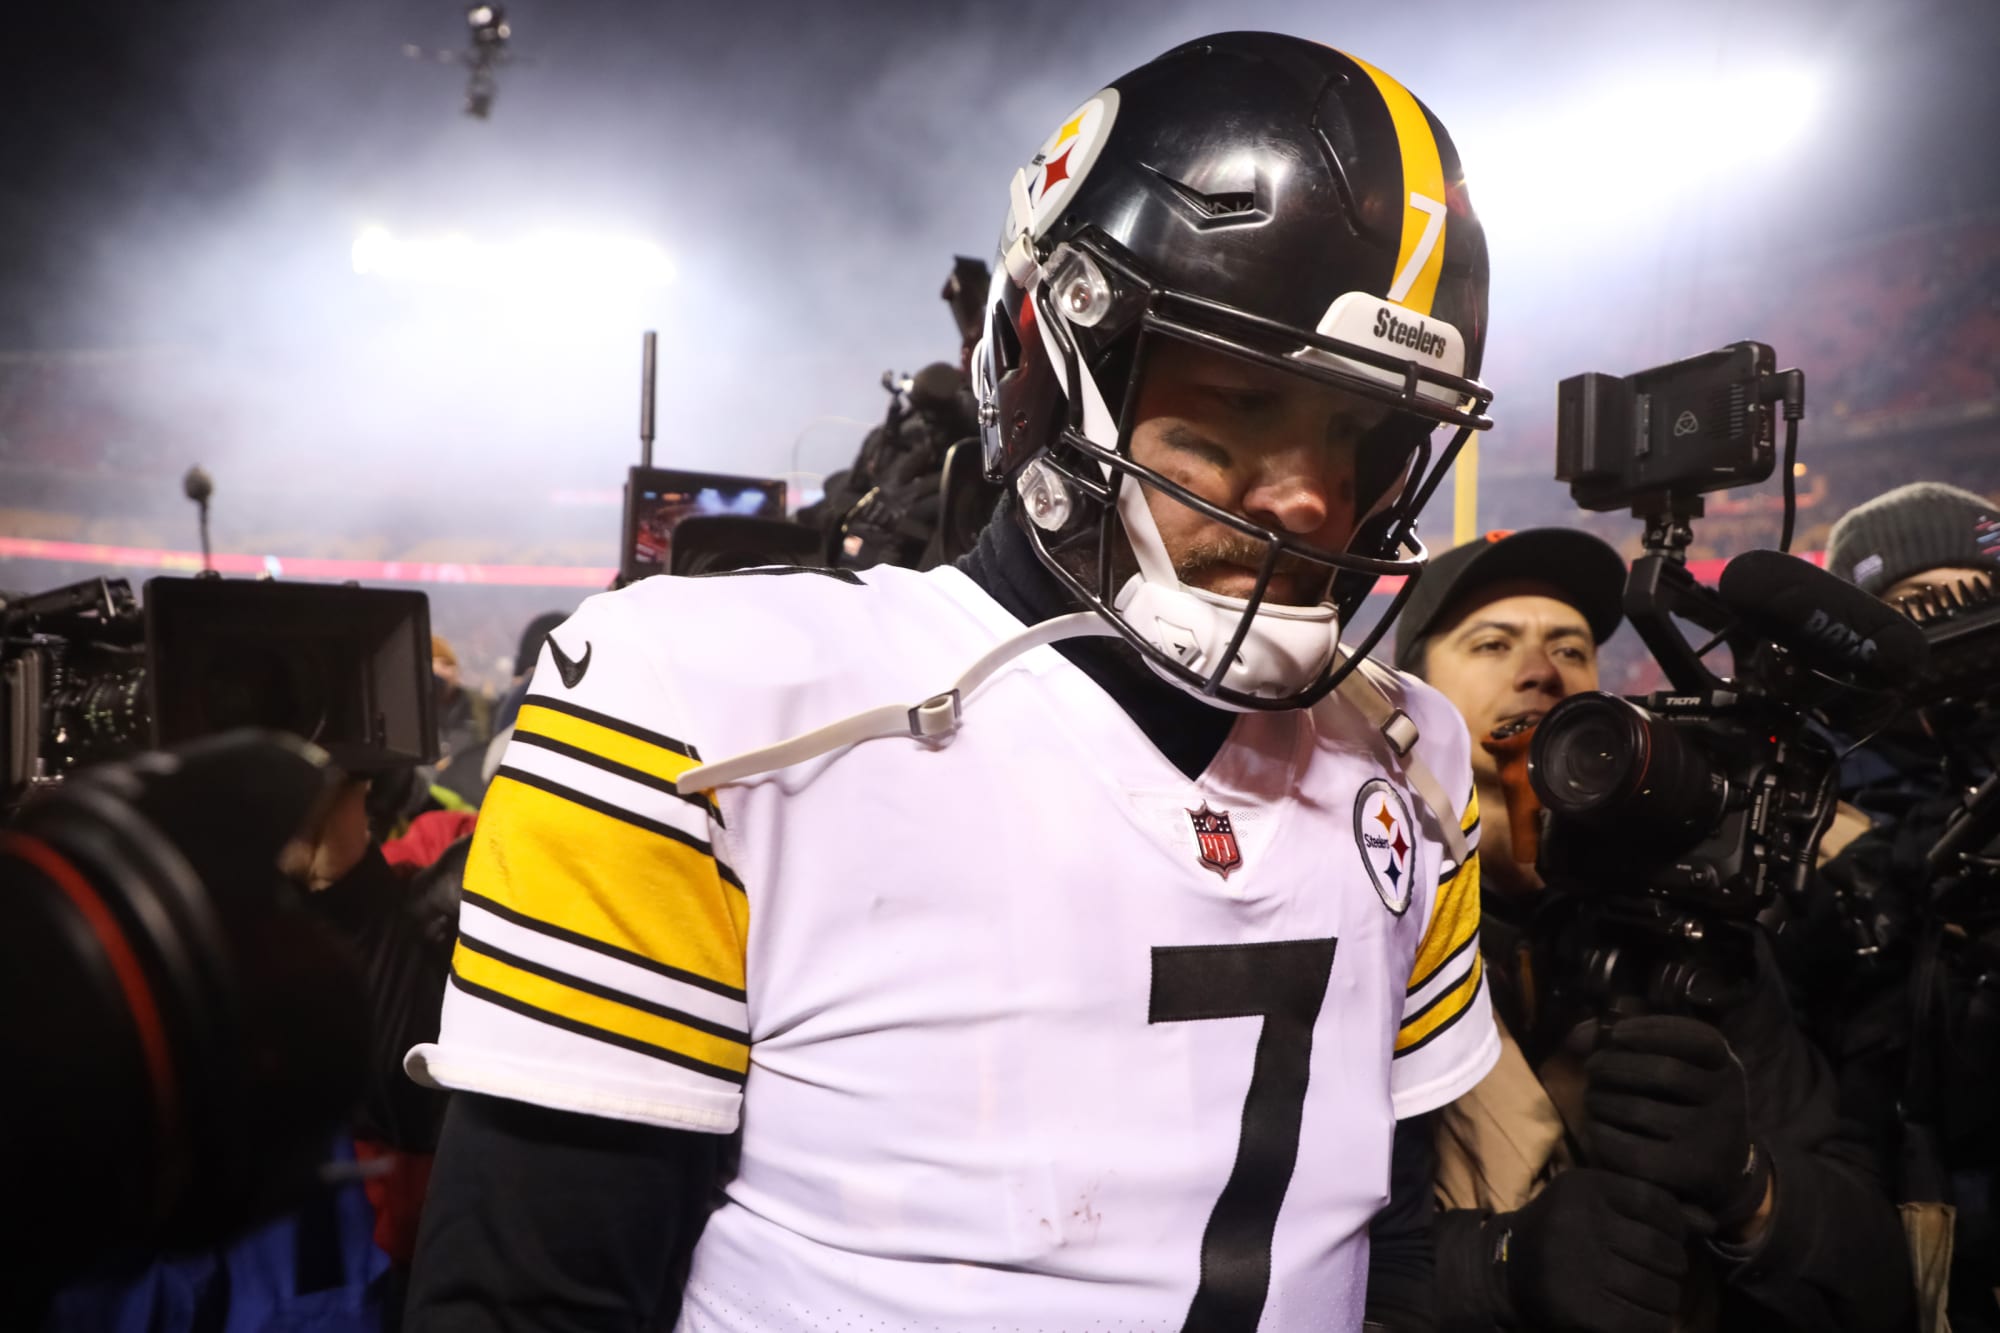 Ben Roethlisberger says Steelers wanted to move on, he can still play